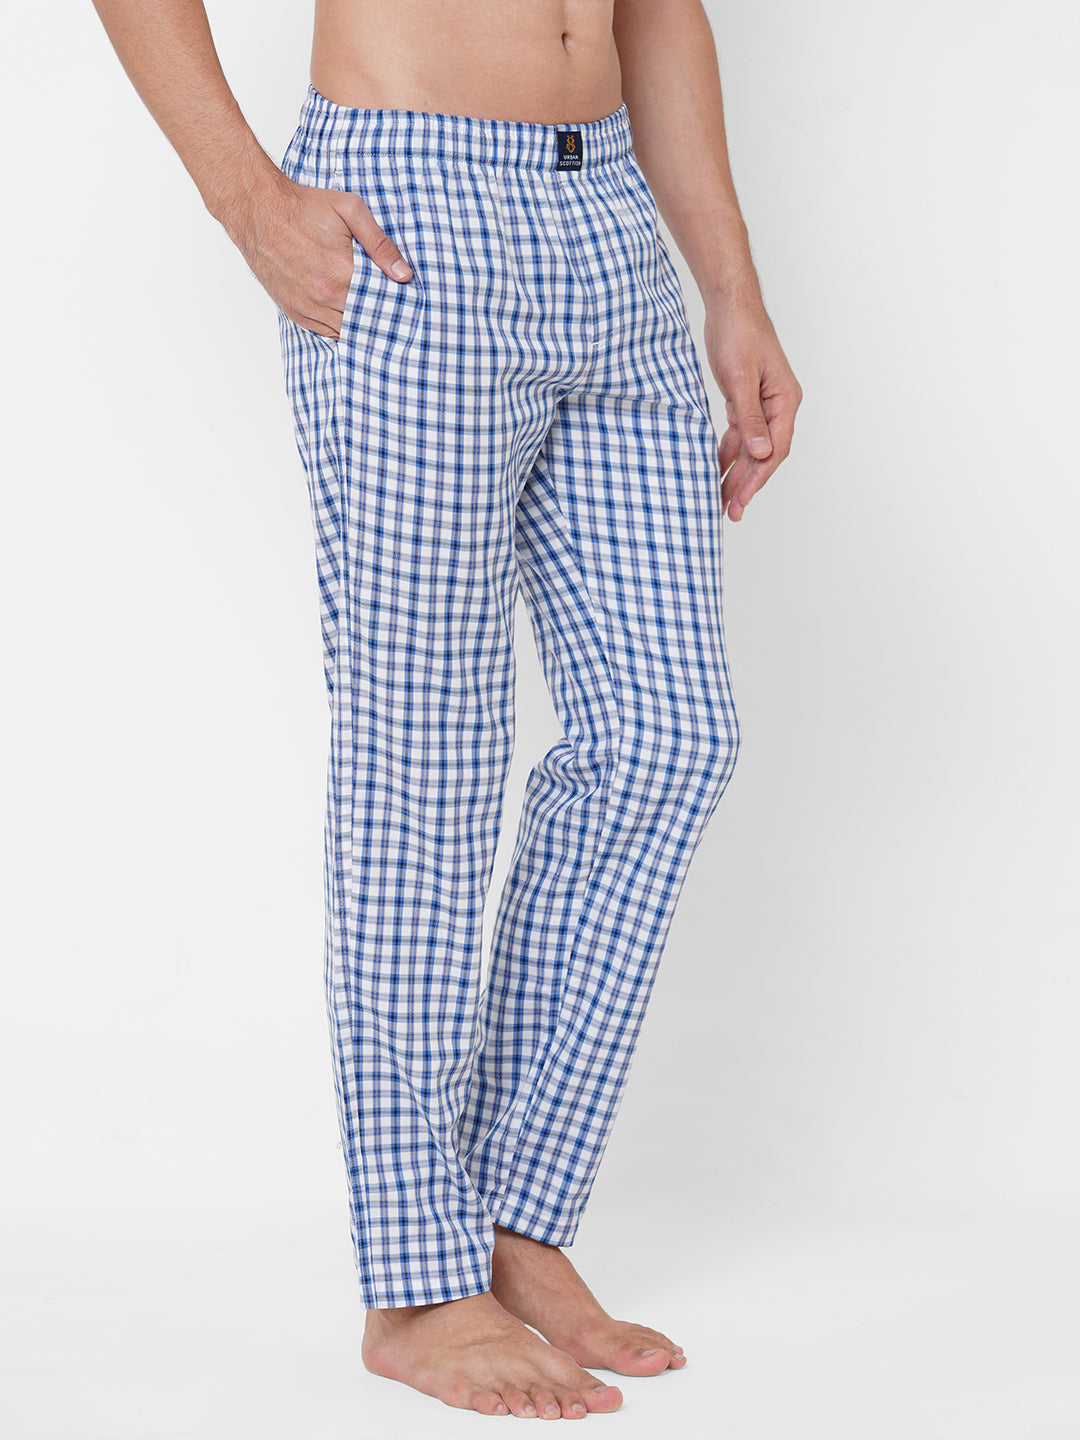 Men's Checkered, Blue, Cotton, Cotton, Elasticated, Waistband, Pyjama  With Side Pockets